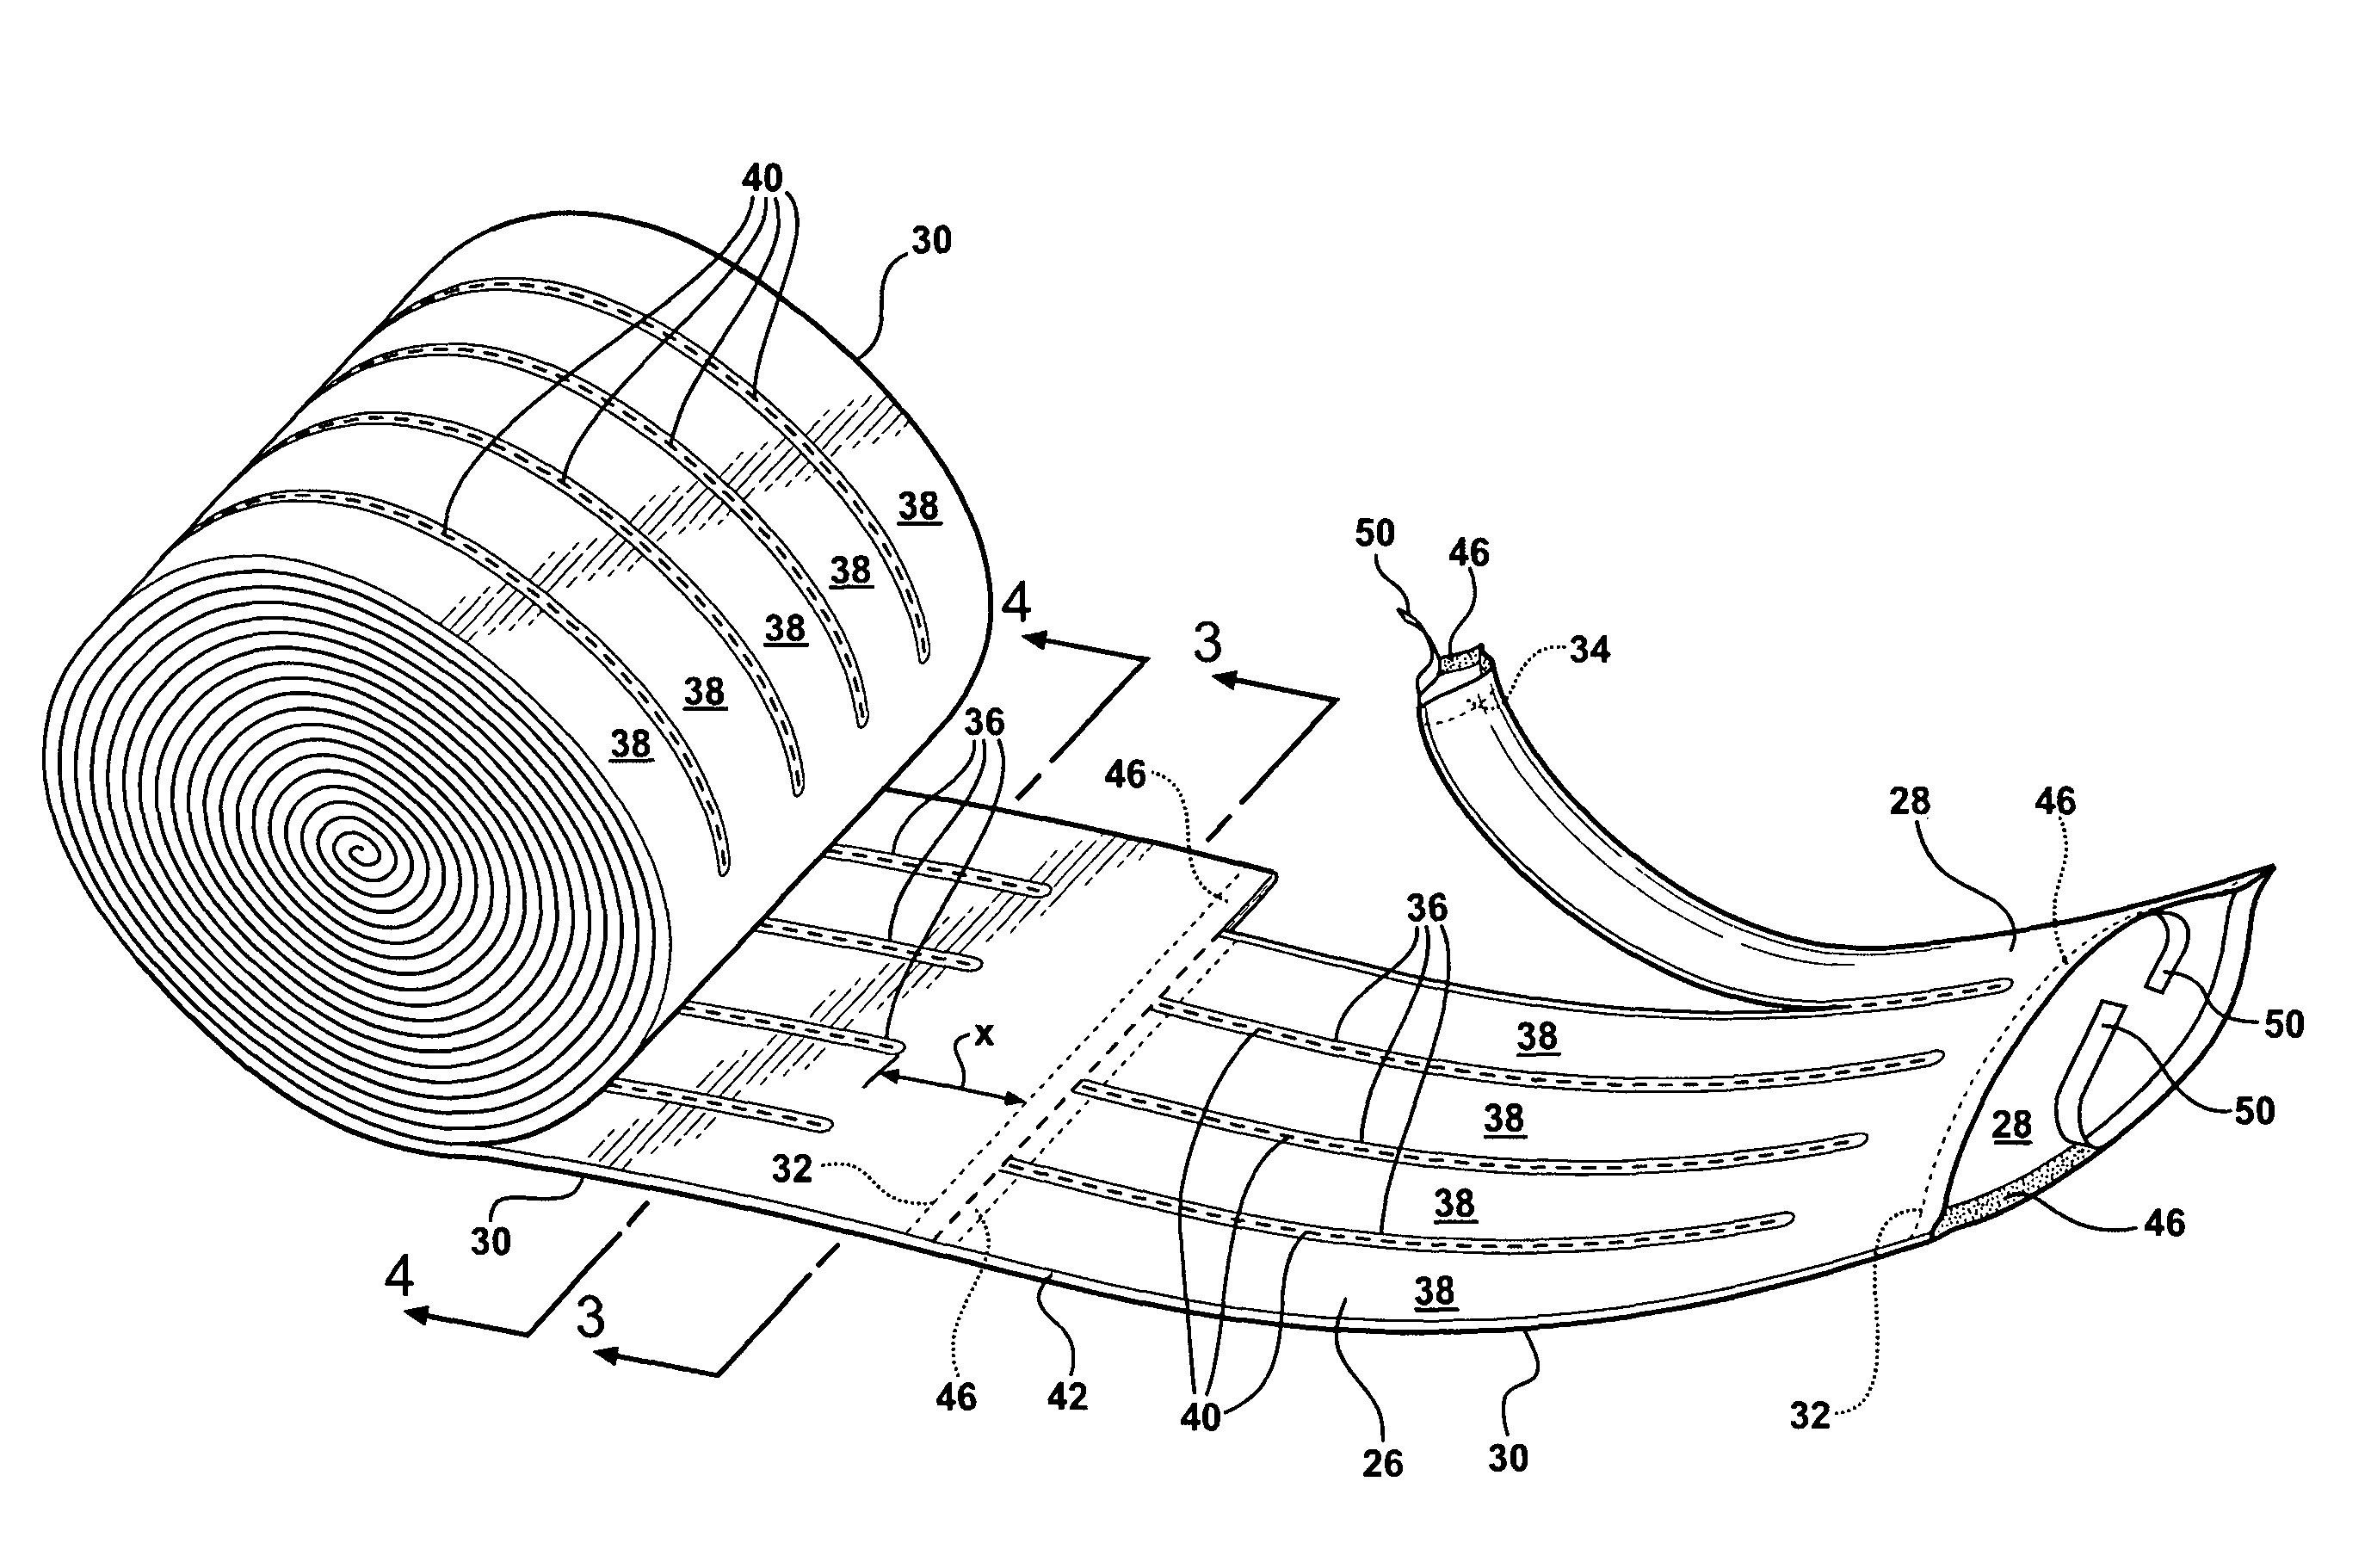 Disposable sheath for telementry leads of a monitoring device